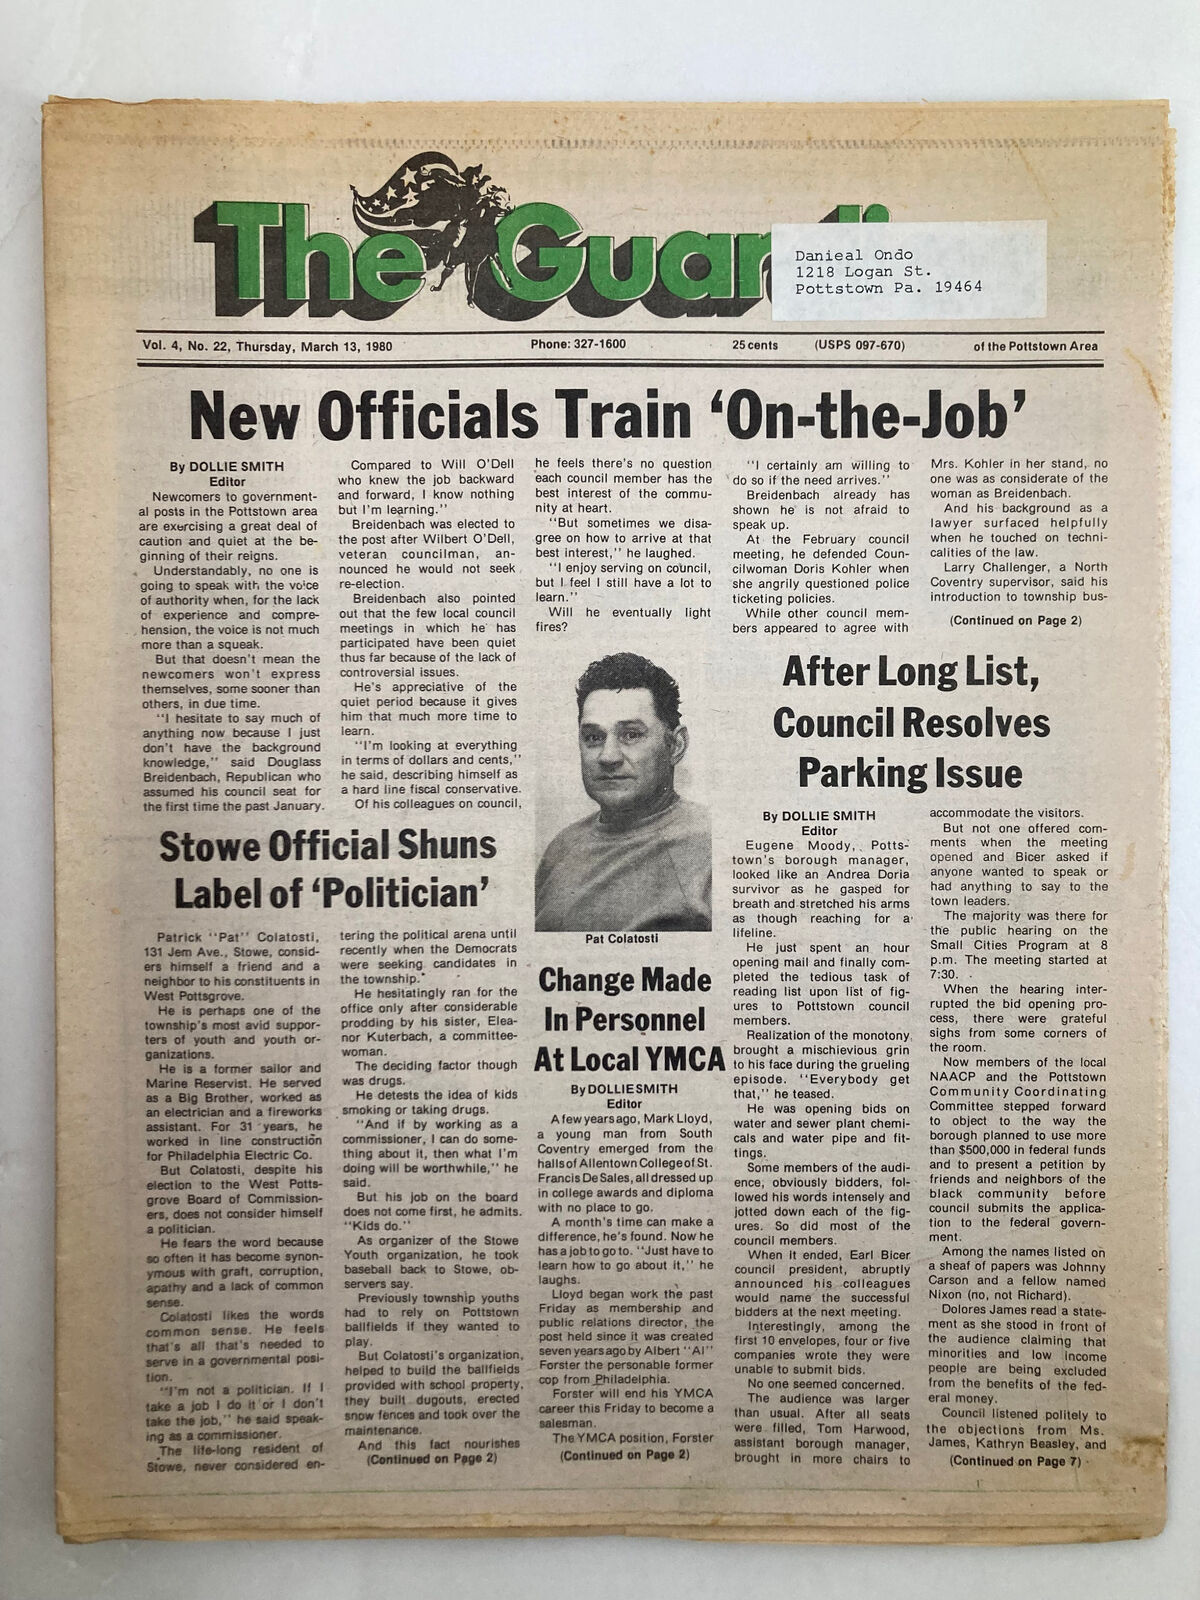 The Guardian Newspaper March 13 1980 Vol 4 #22 New Officials Train On-the-Job